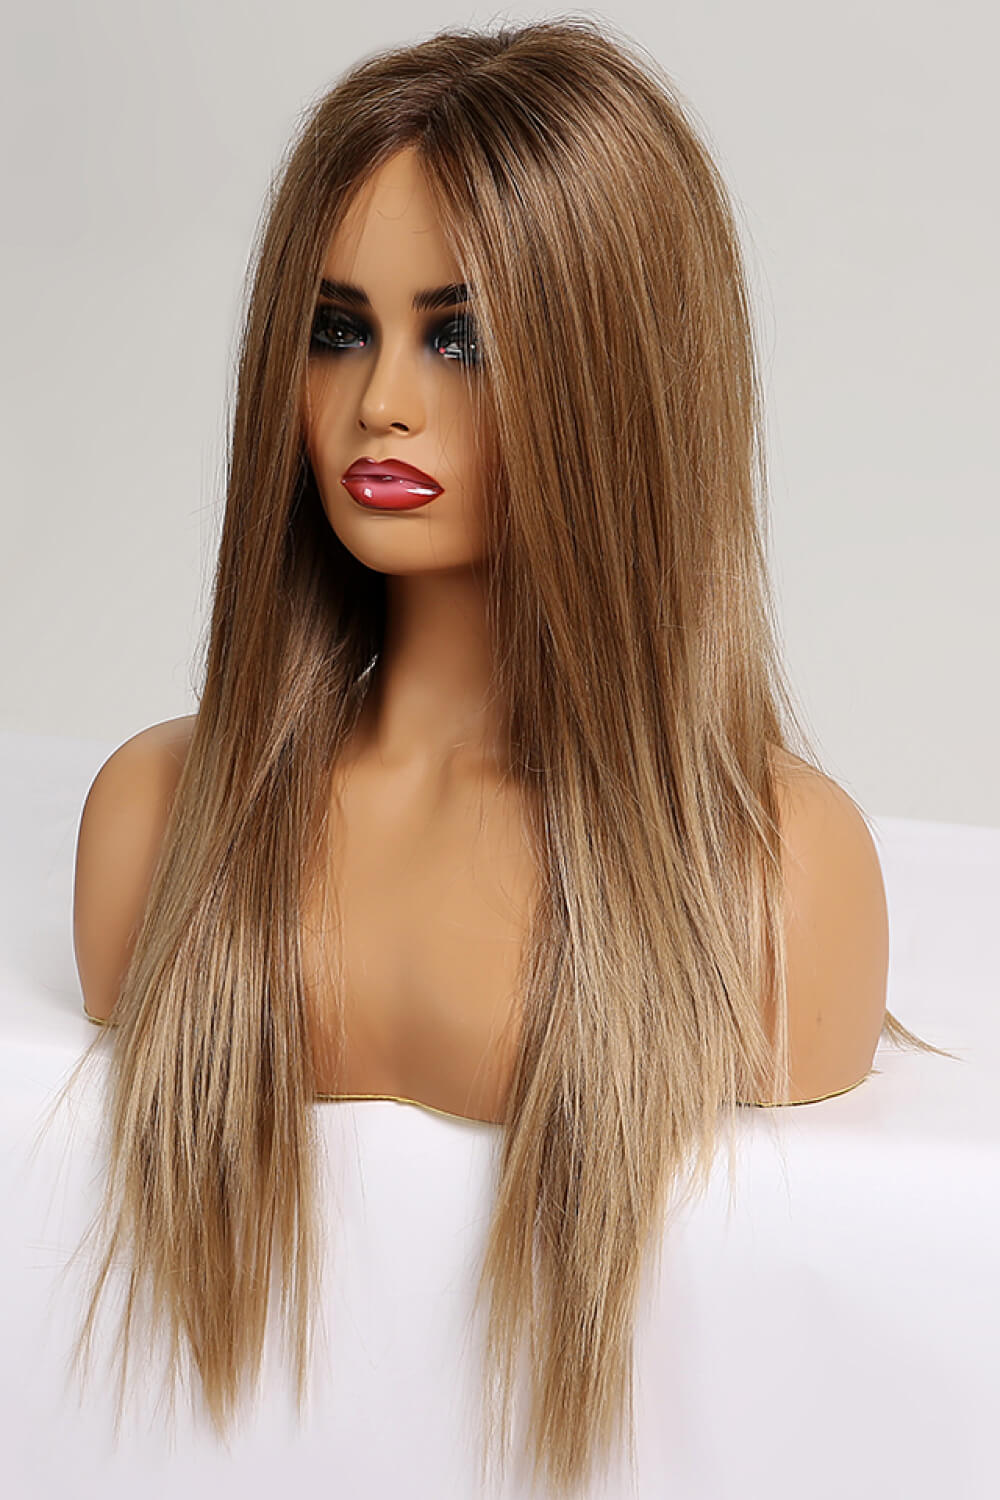 LoLo 13 x 2" Lace Front Wigs Synthetic Long Straight 26'' 150% Density